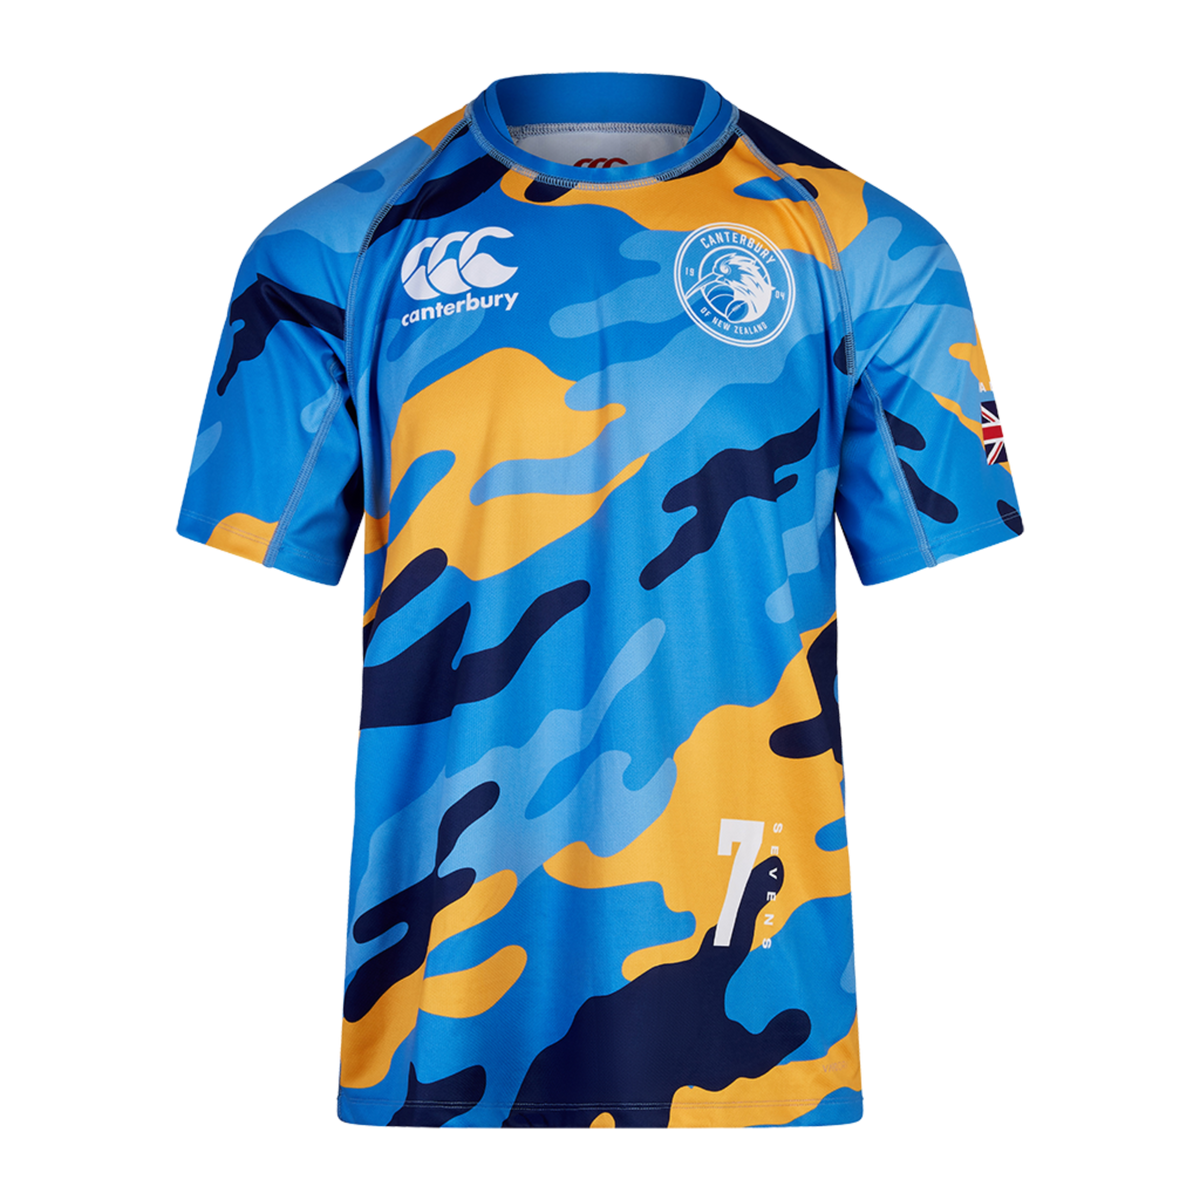 Canterbury CCC MTO Raiona Rugby Shirt Available in Men&#39;s, Women&#39;s, and Youth Sizing XS - 4XL With Customizable Team Colors